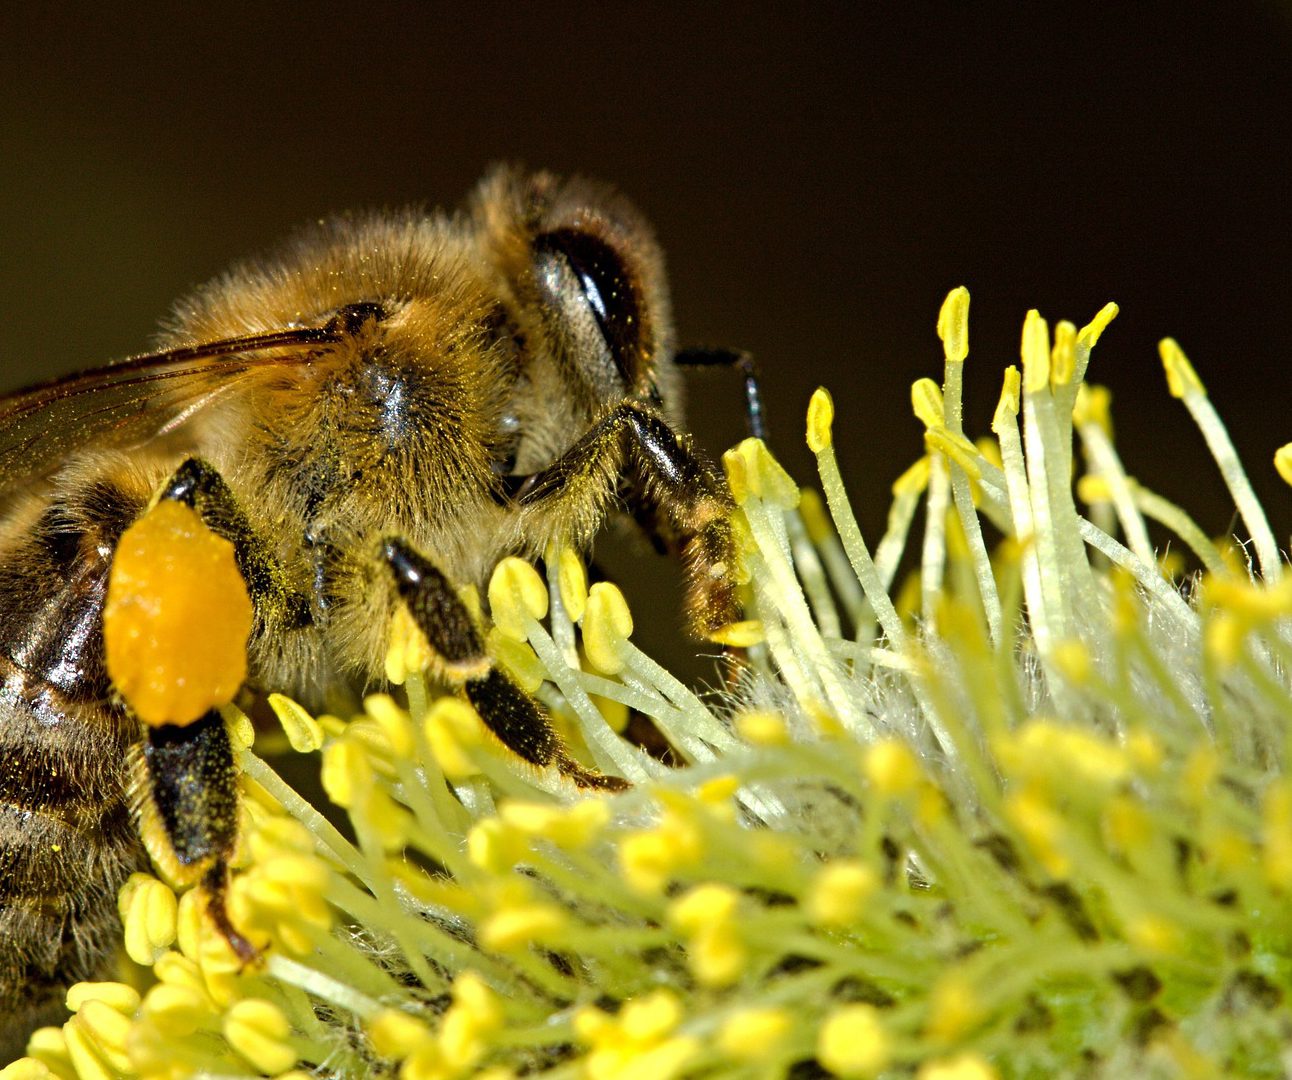 Close up of a bee on the pollen stems of a flower